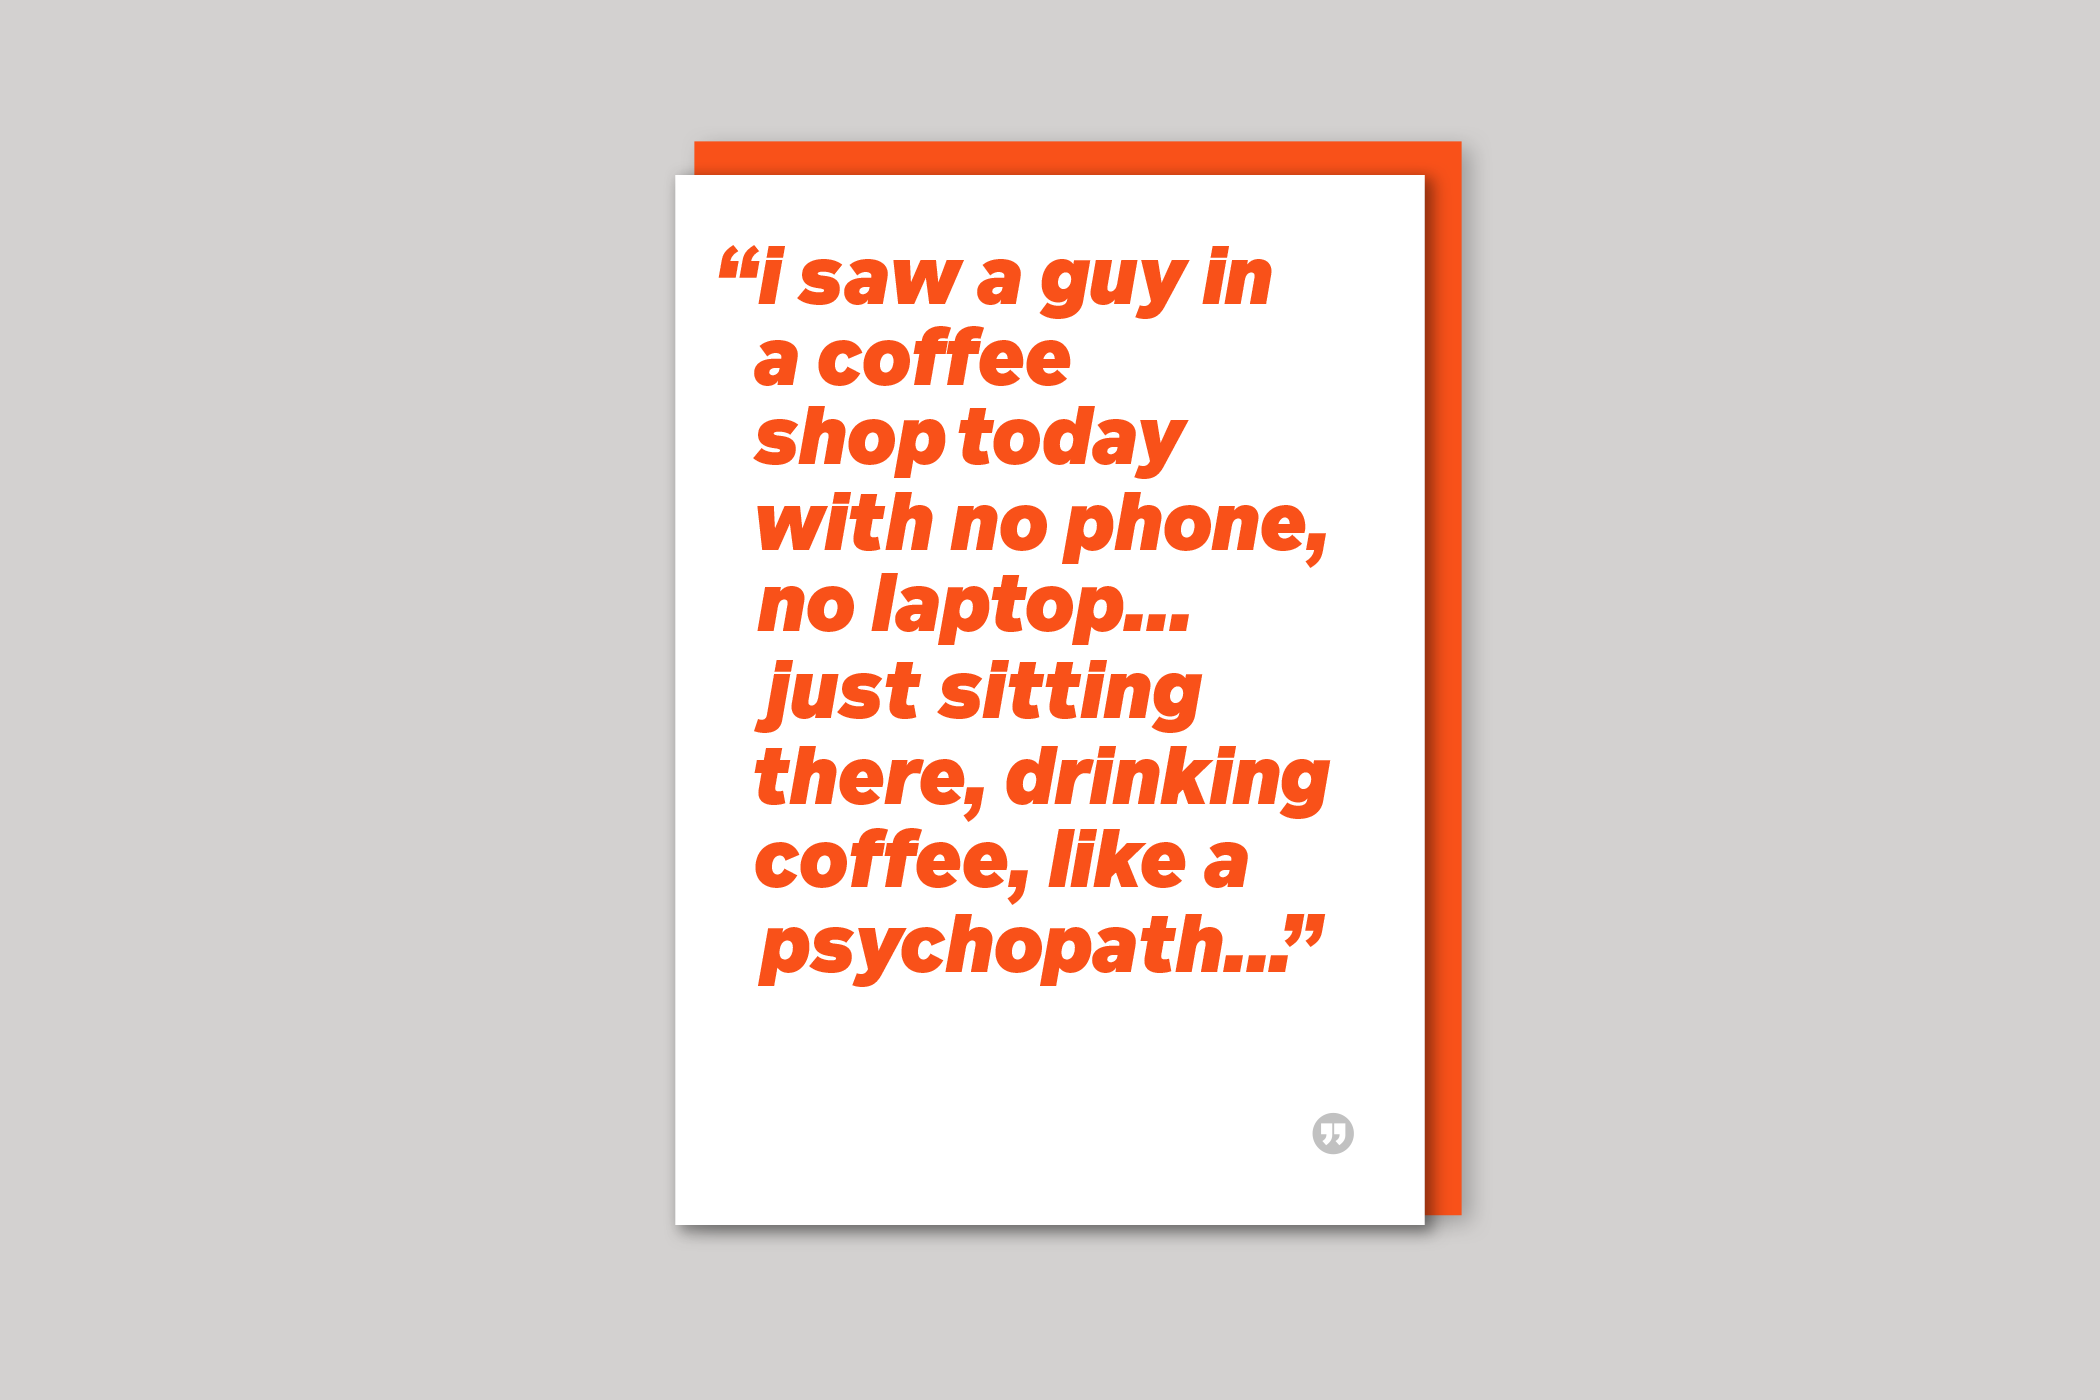 Psychopath funny quotation from Quotecards range of cards by Icon, back page.